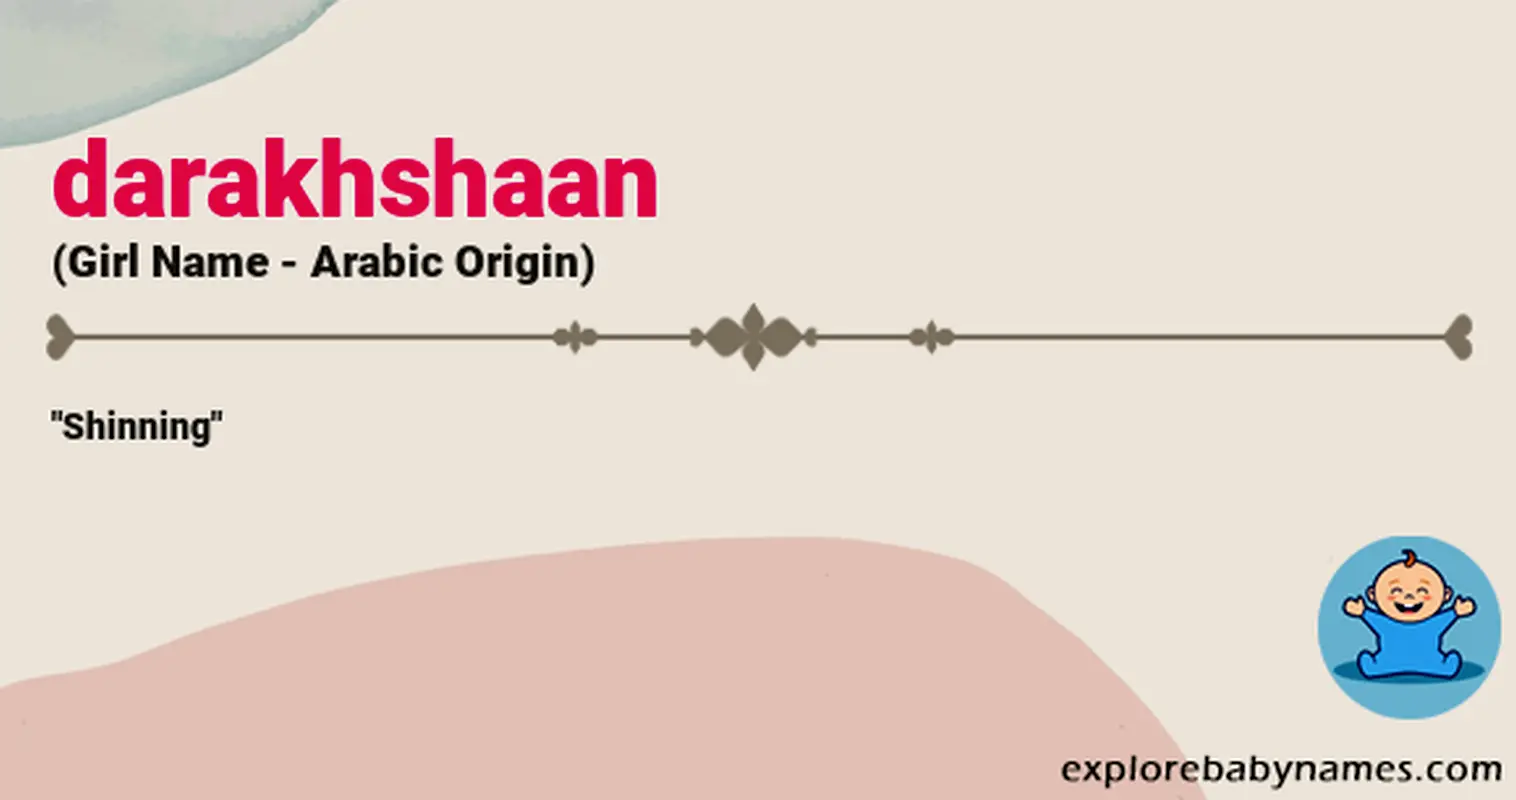 Meaning of Darakhshaan